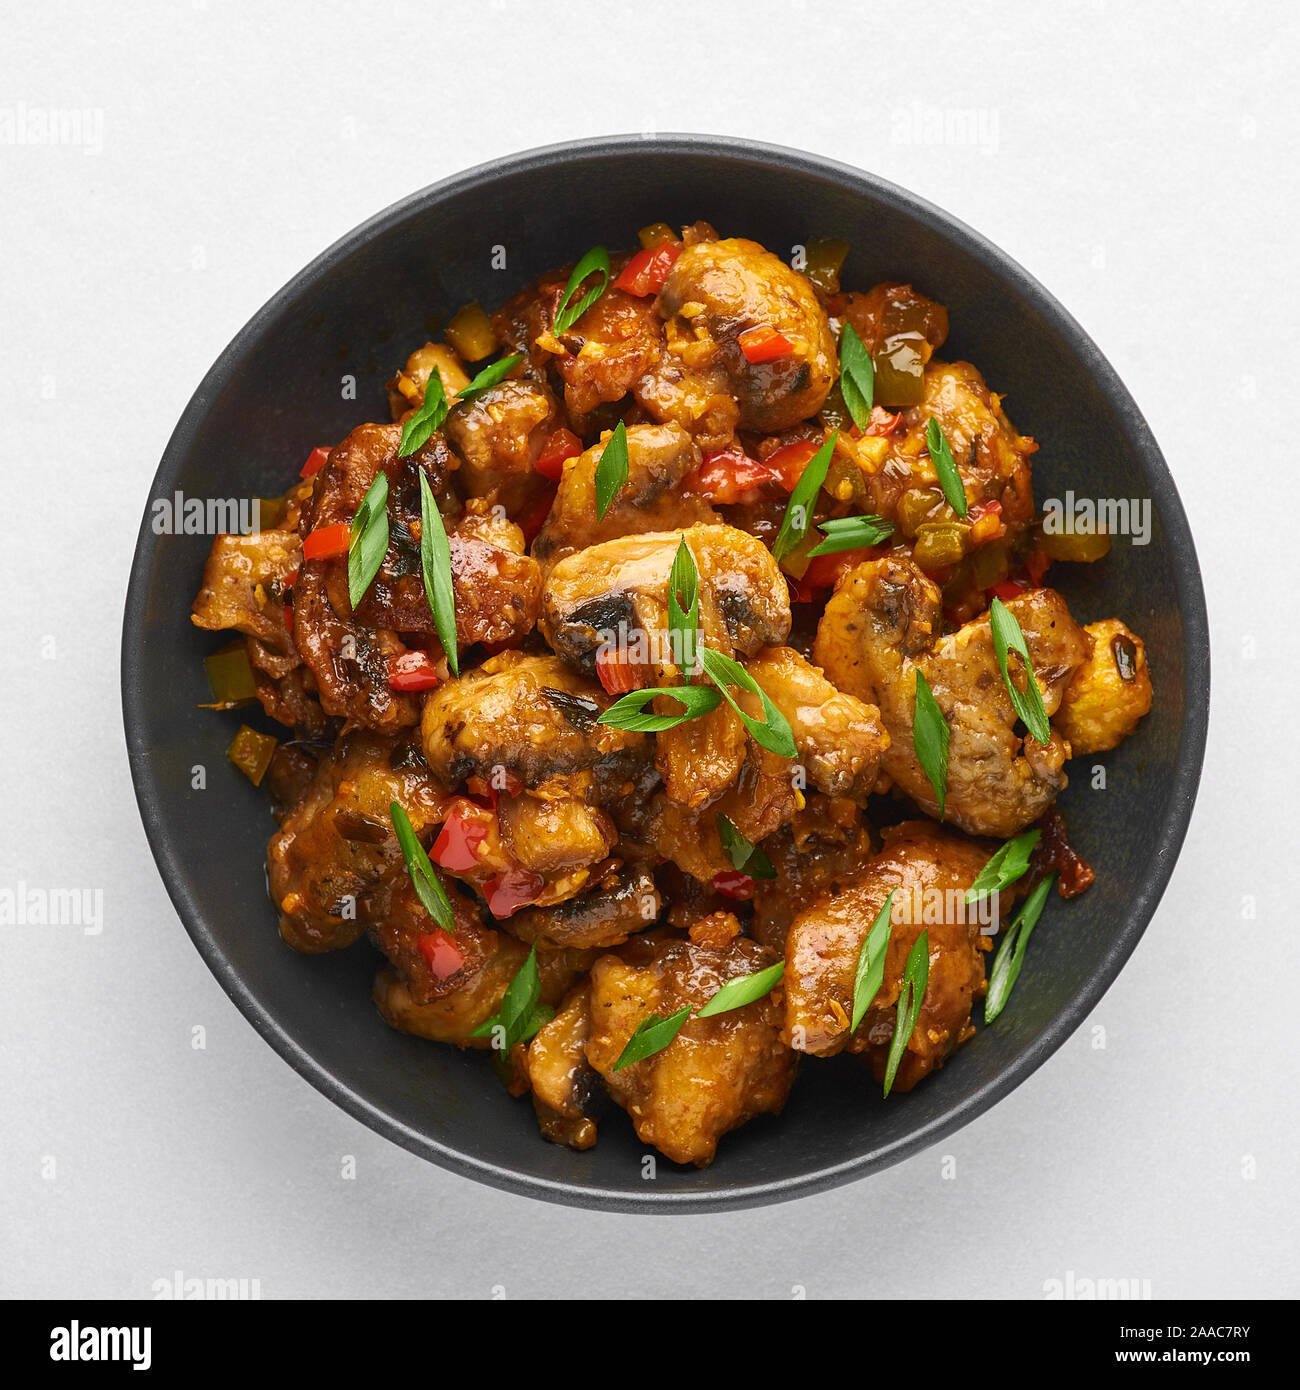 Mushrooms Manchurian dry in black bowl isolated at white background. Mushroom Manchurian - is indo chinese cuisine dish with deep fried mushrooms, bel Stock Photo